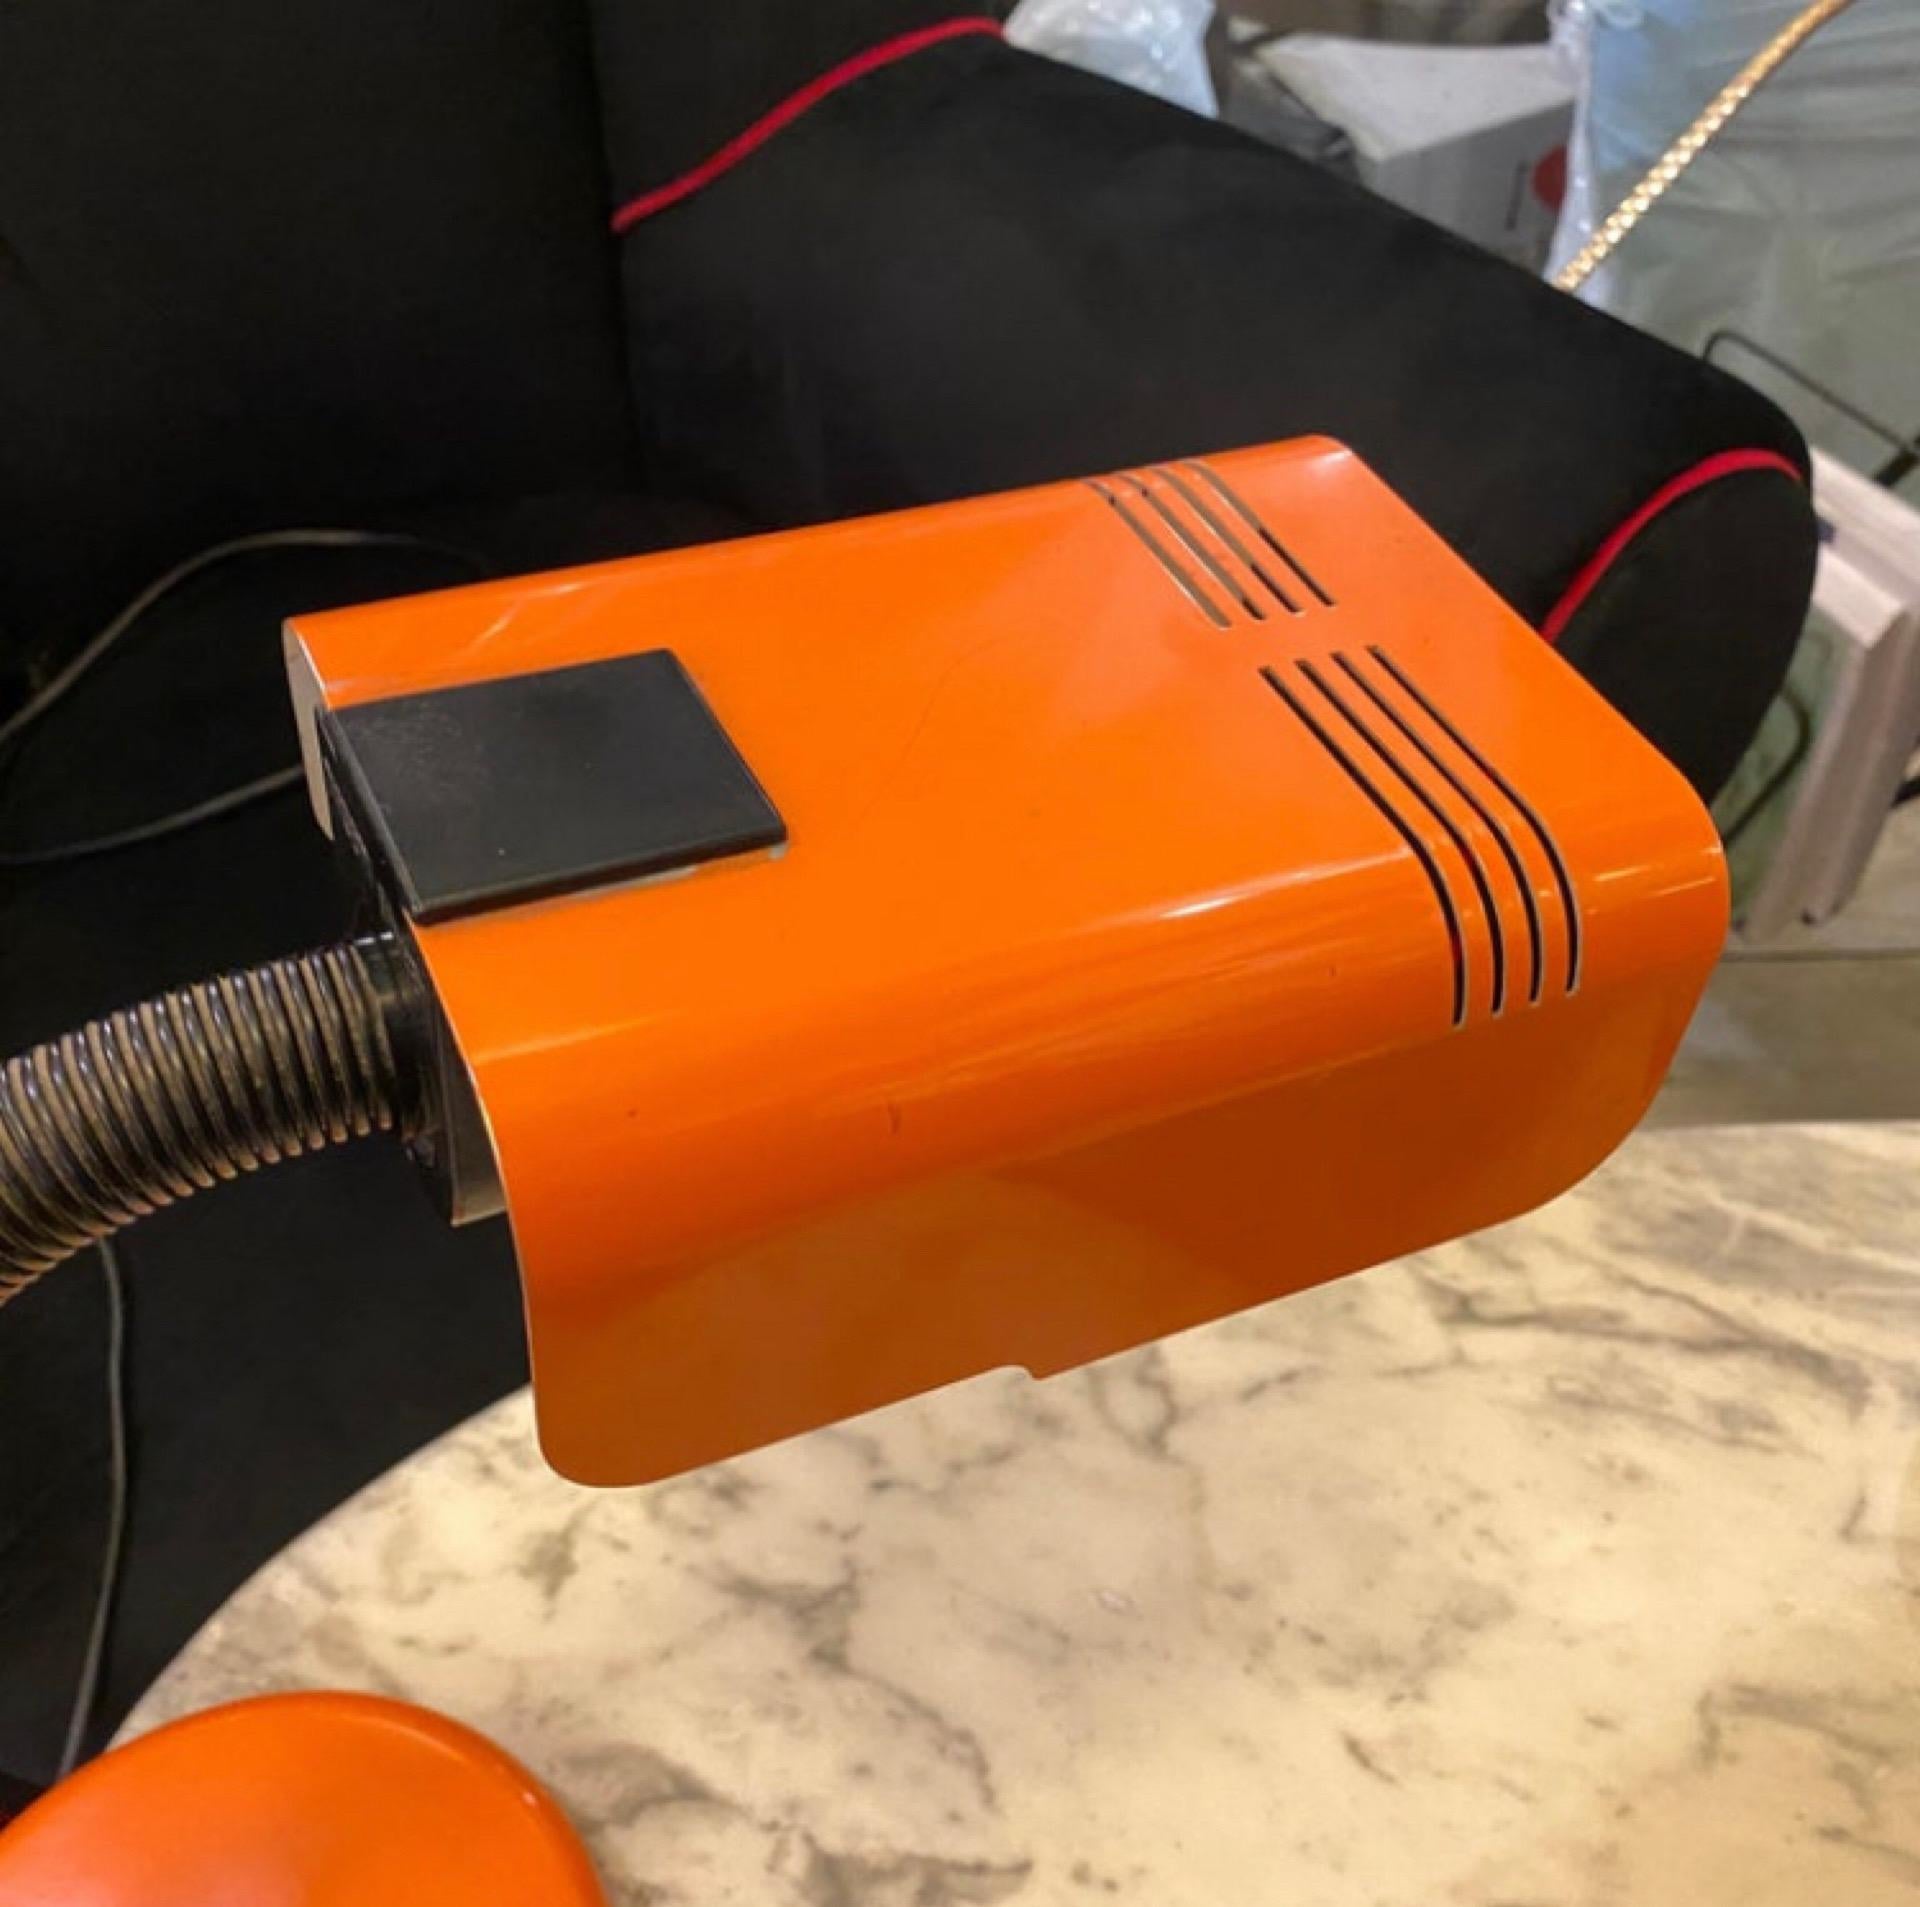 Metal 1970s Space Age Orange and Black Italian Desk Lamp by Targetti Sankey For Sale